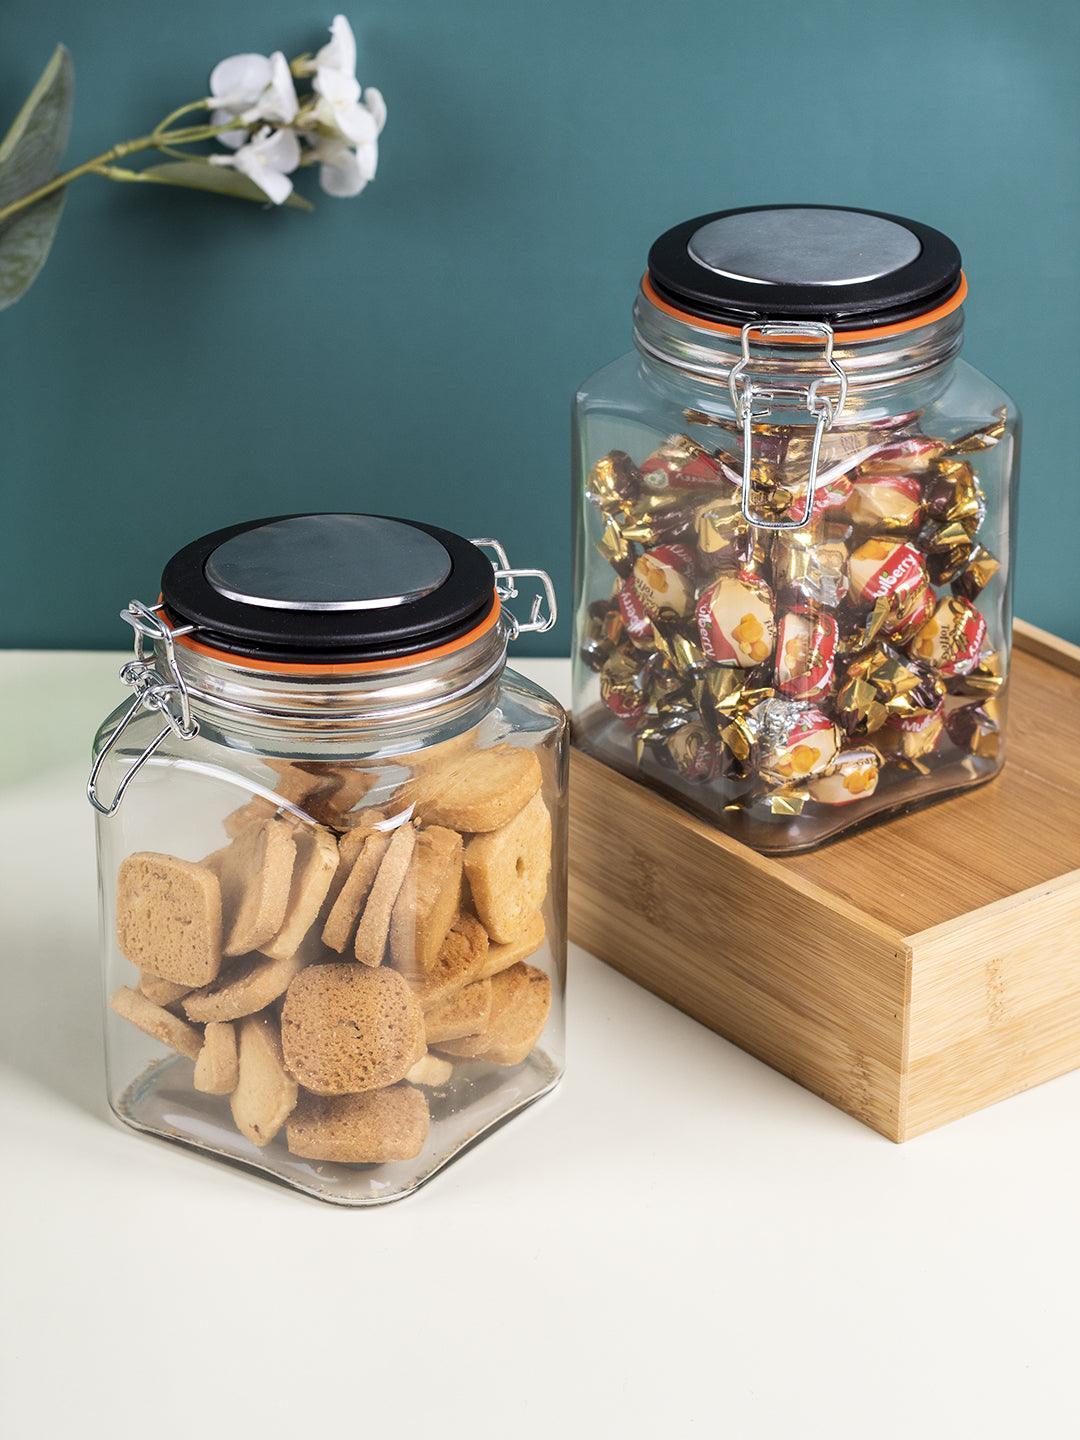 Glass Jar With Airtight Lid Pack Of 2 Pcs - (Each 1200 Ml) - MARKET 99